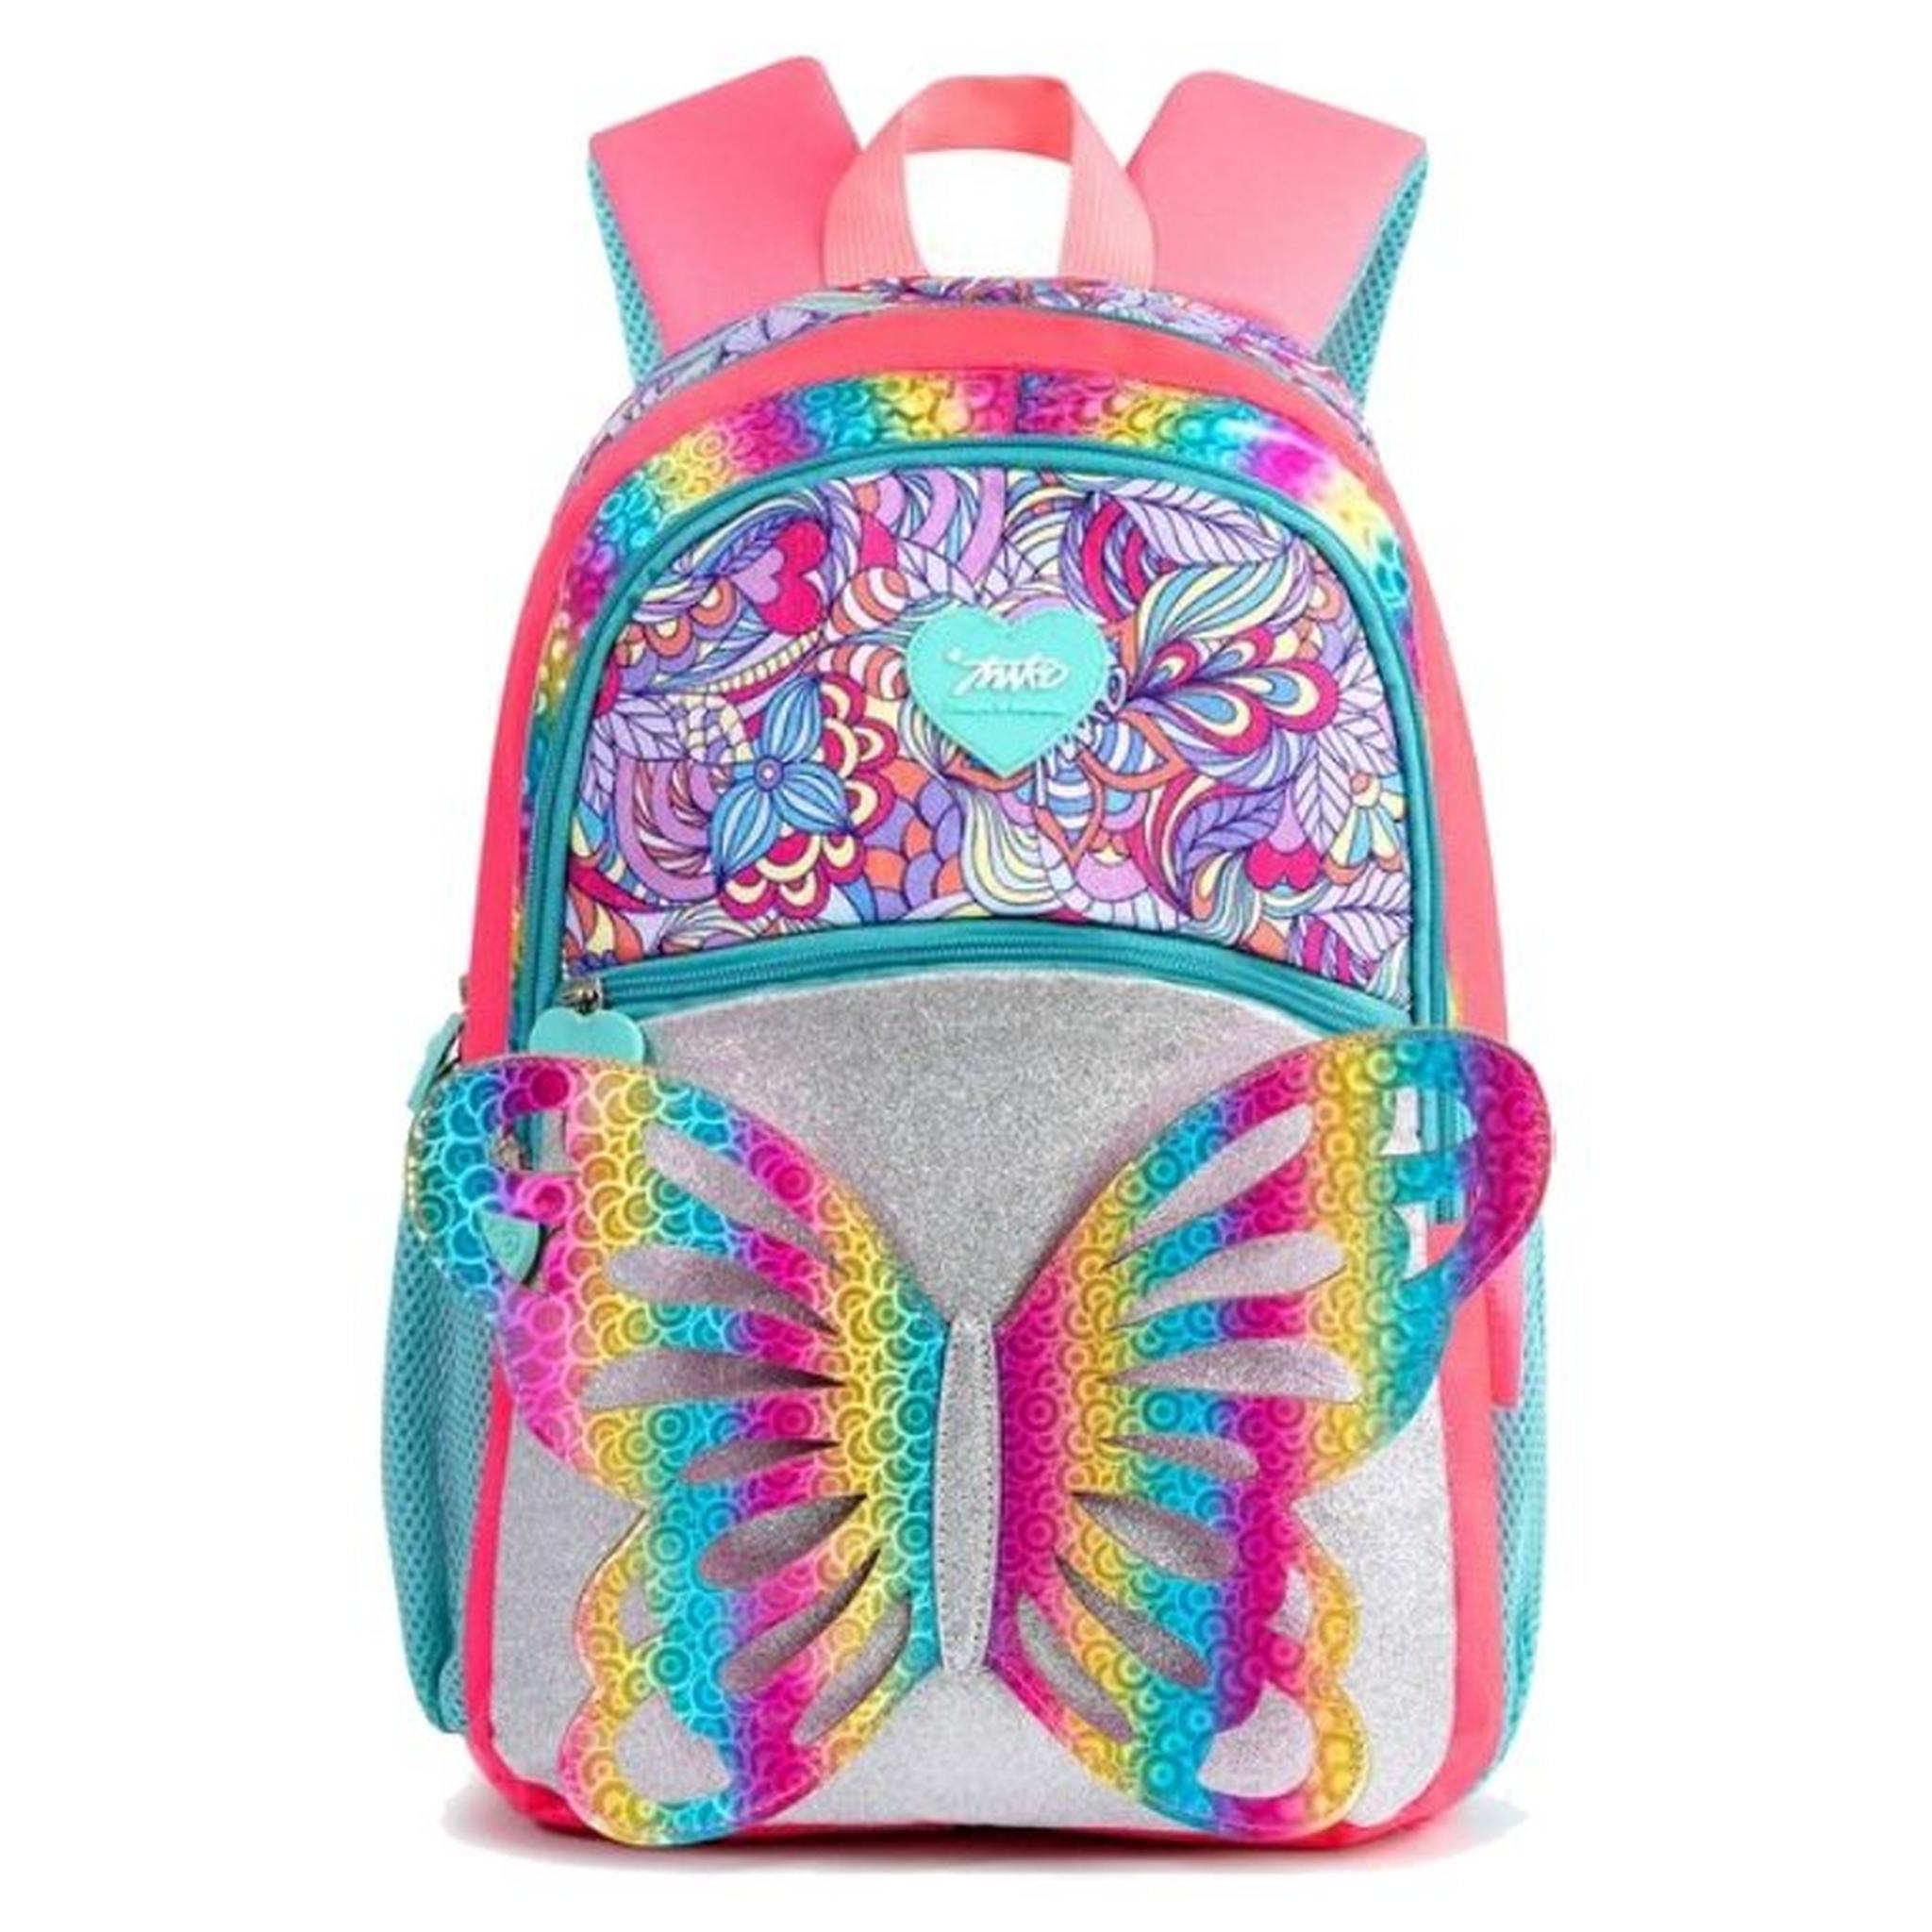 Riwbox Butterfly Backpack - Pink